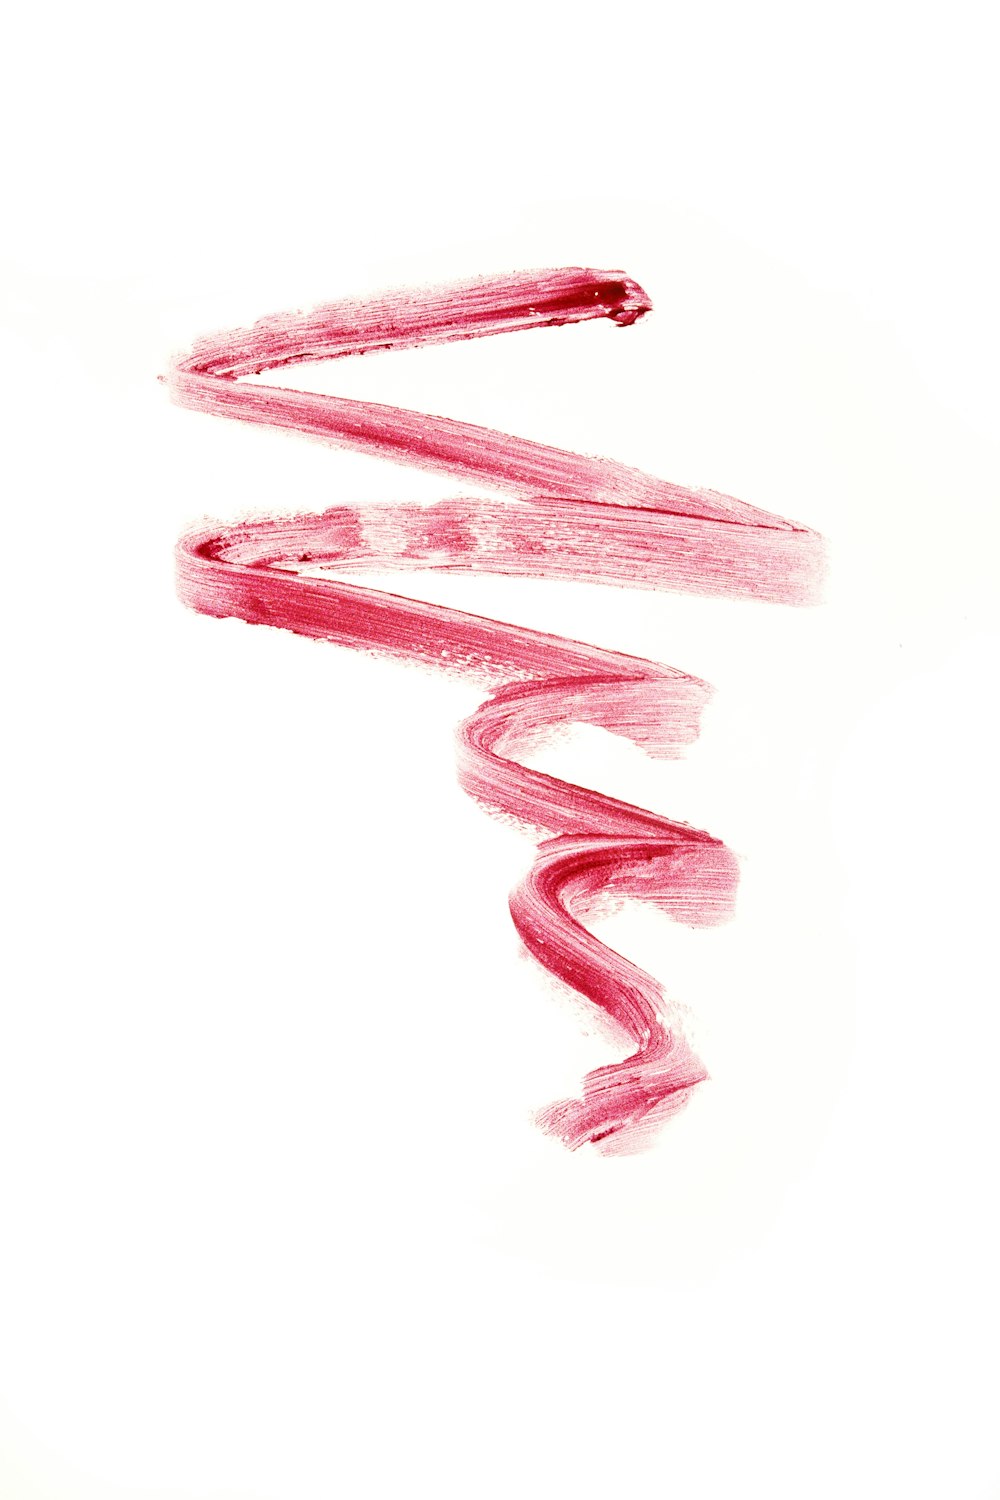 a drawing of a red spiral on a white background